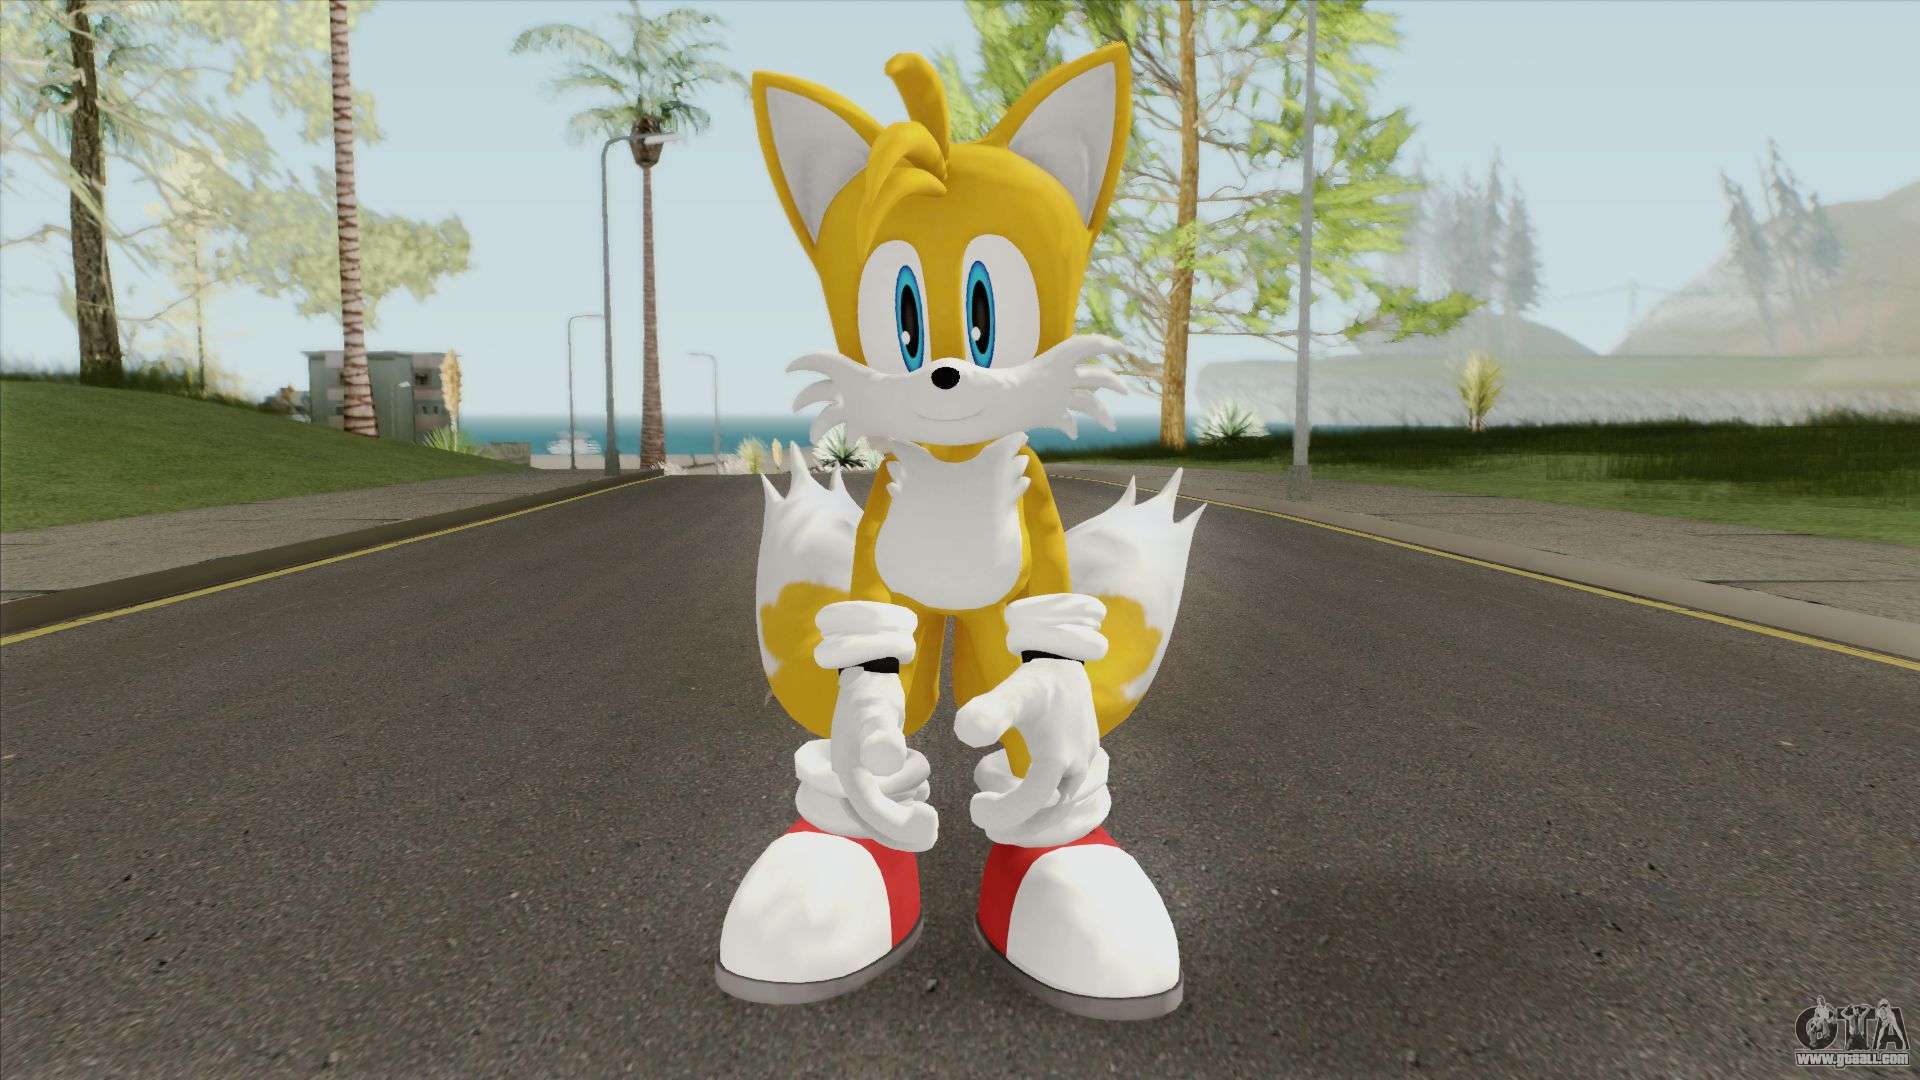 Tails Doll - Sonic R for GTA San Andreas